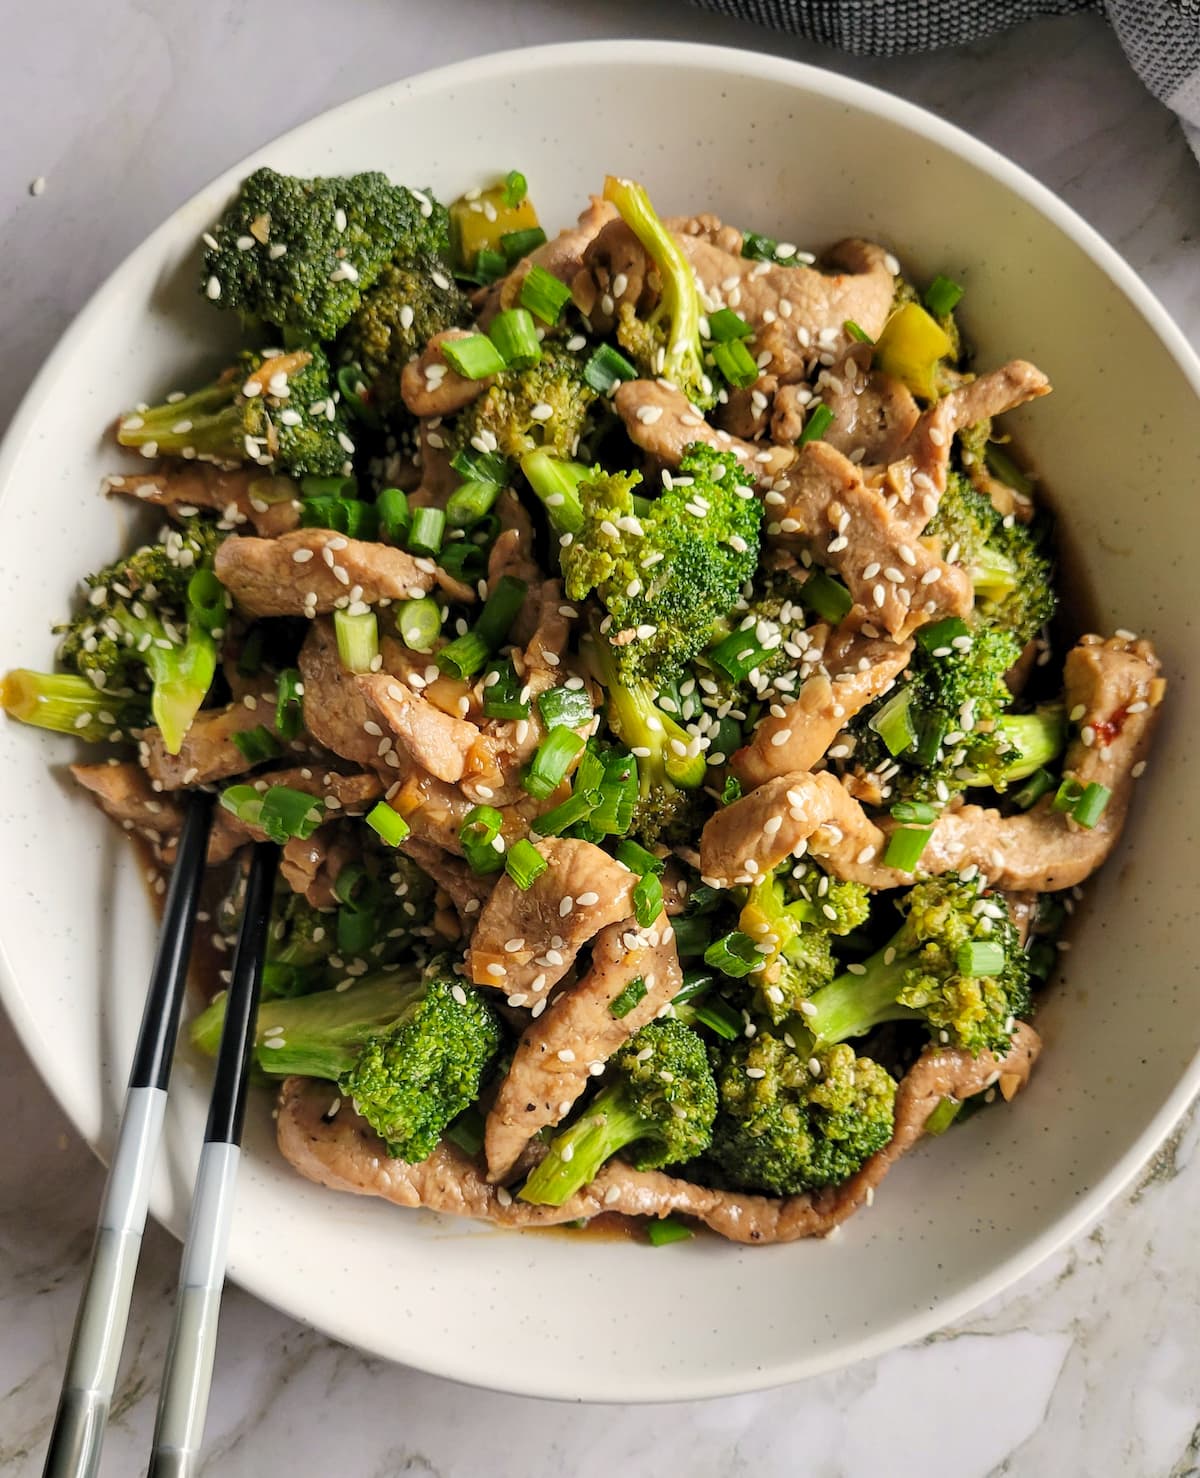 cooked broccoli and pork strips garnished with sesame seeds in a bowl with some chopsticks